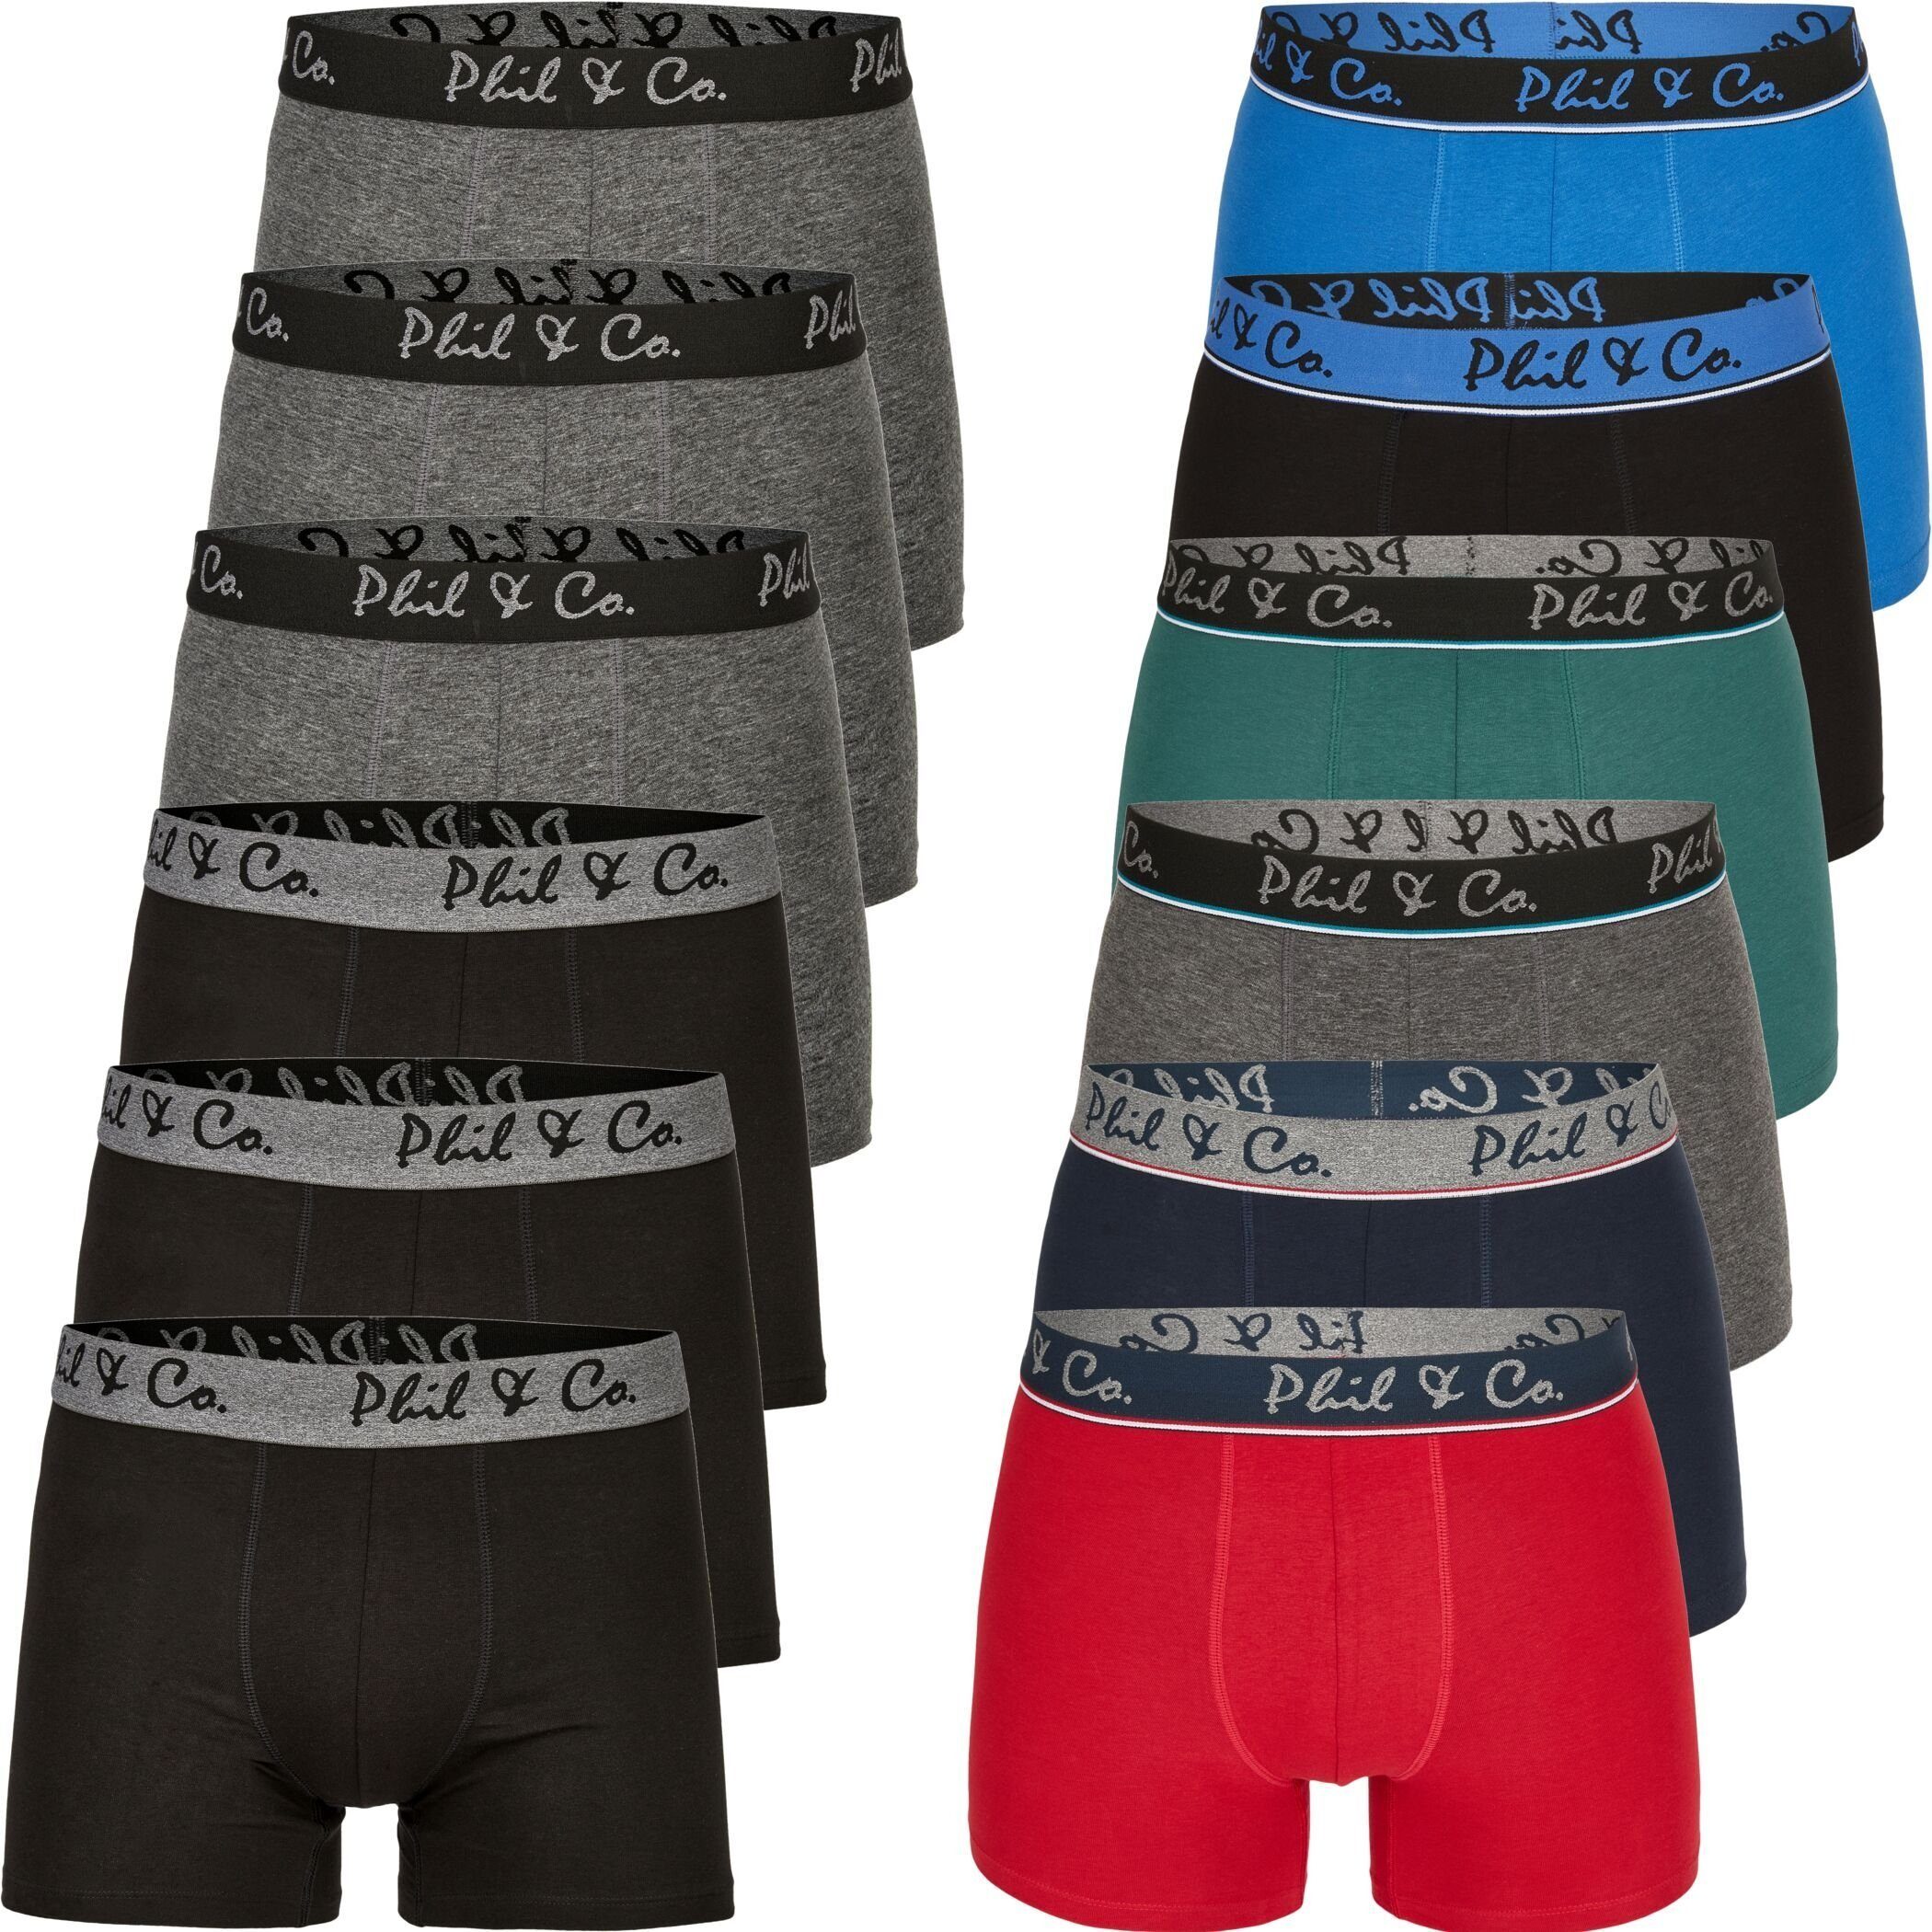 Phil & Co. Boxershorts 12 Pack Phil & Co Berlin Jersey Boxershorts Trunk Short Pant FARBWAHL (1-St) DESIGN 05